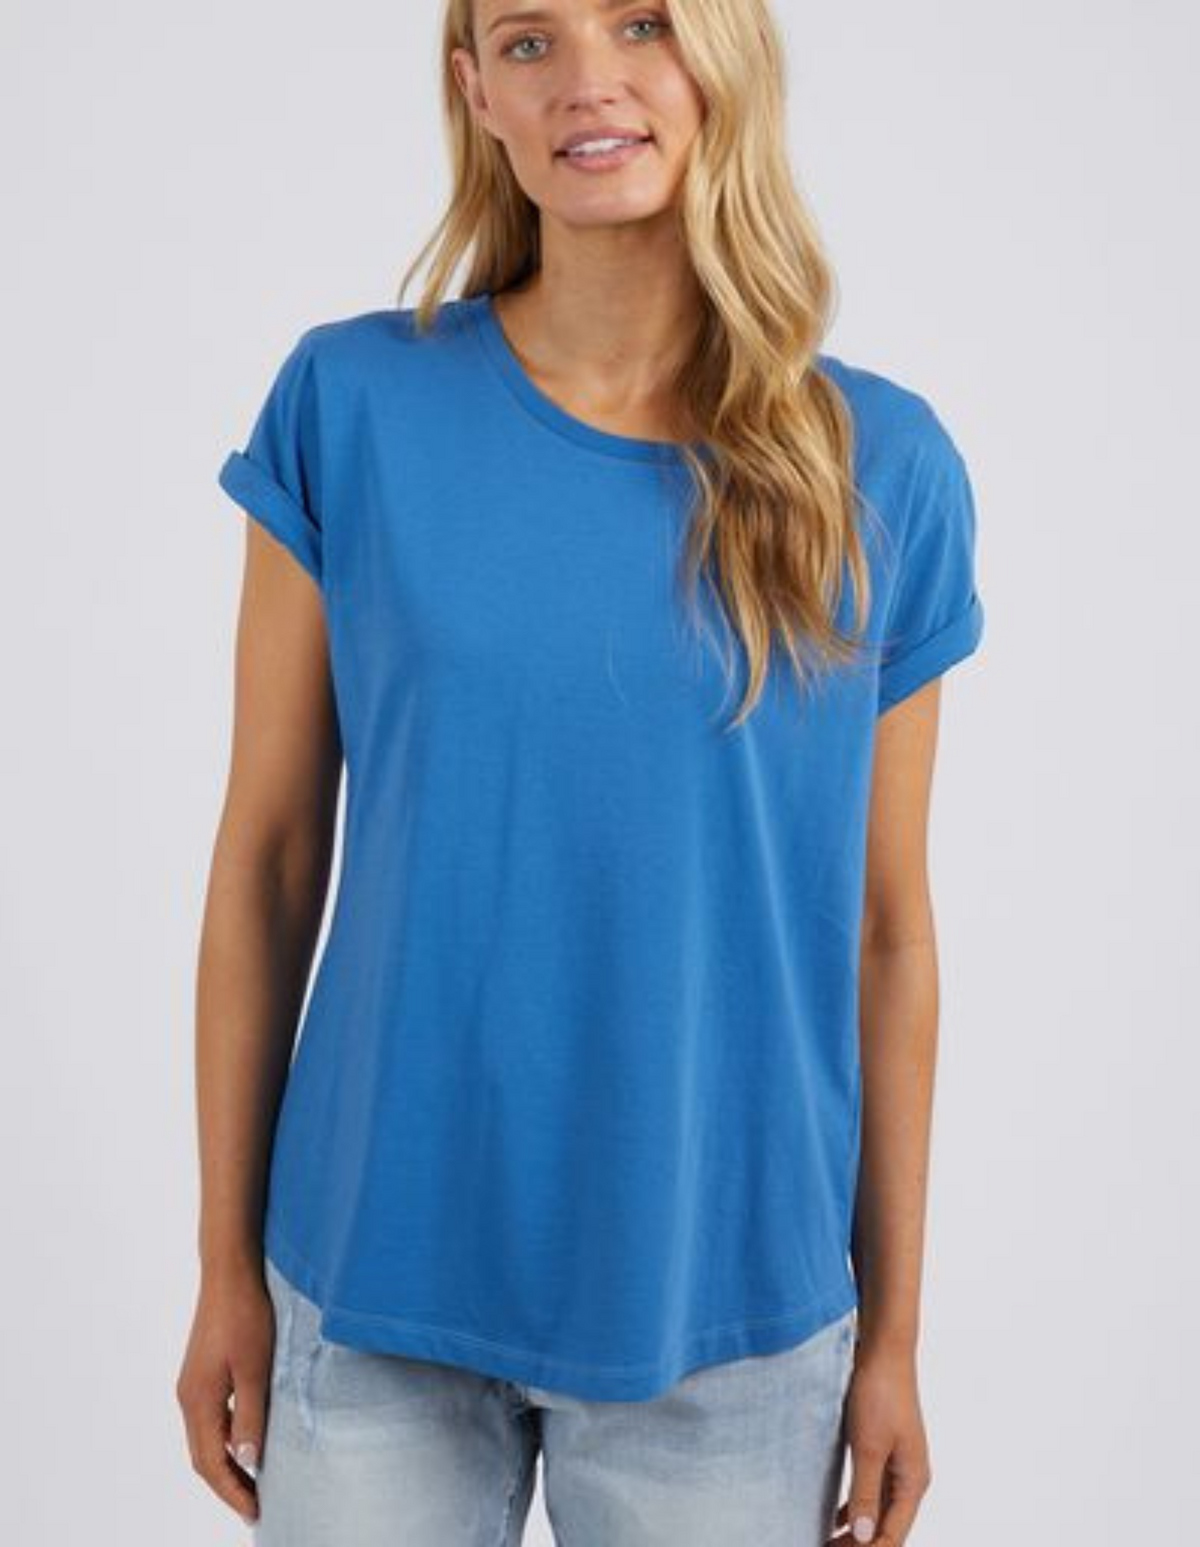 Manly Tee - Tranquil Blue - Foxwood